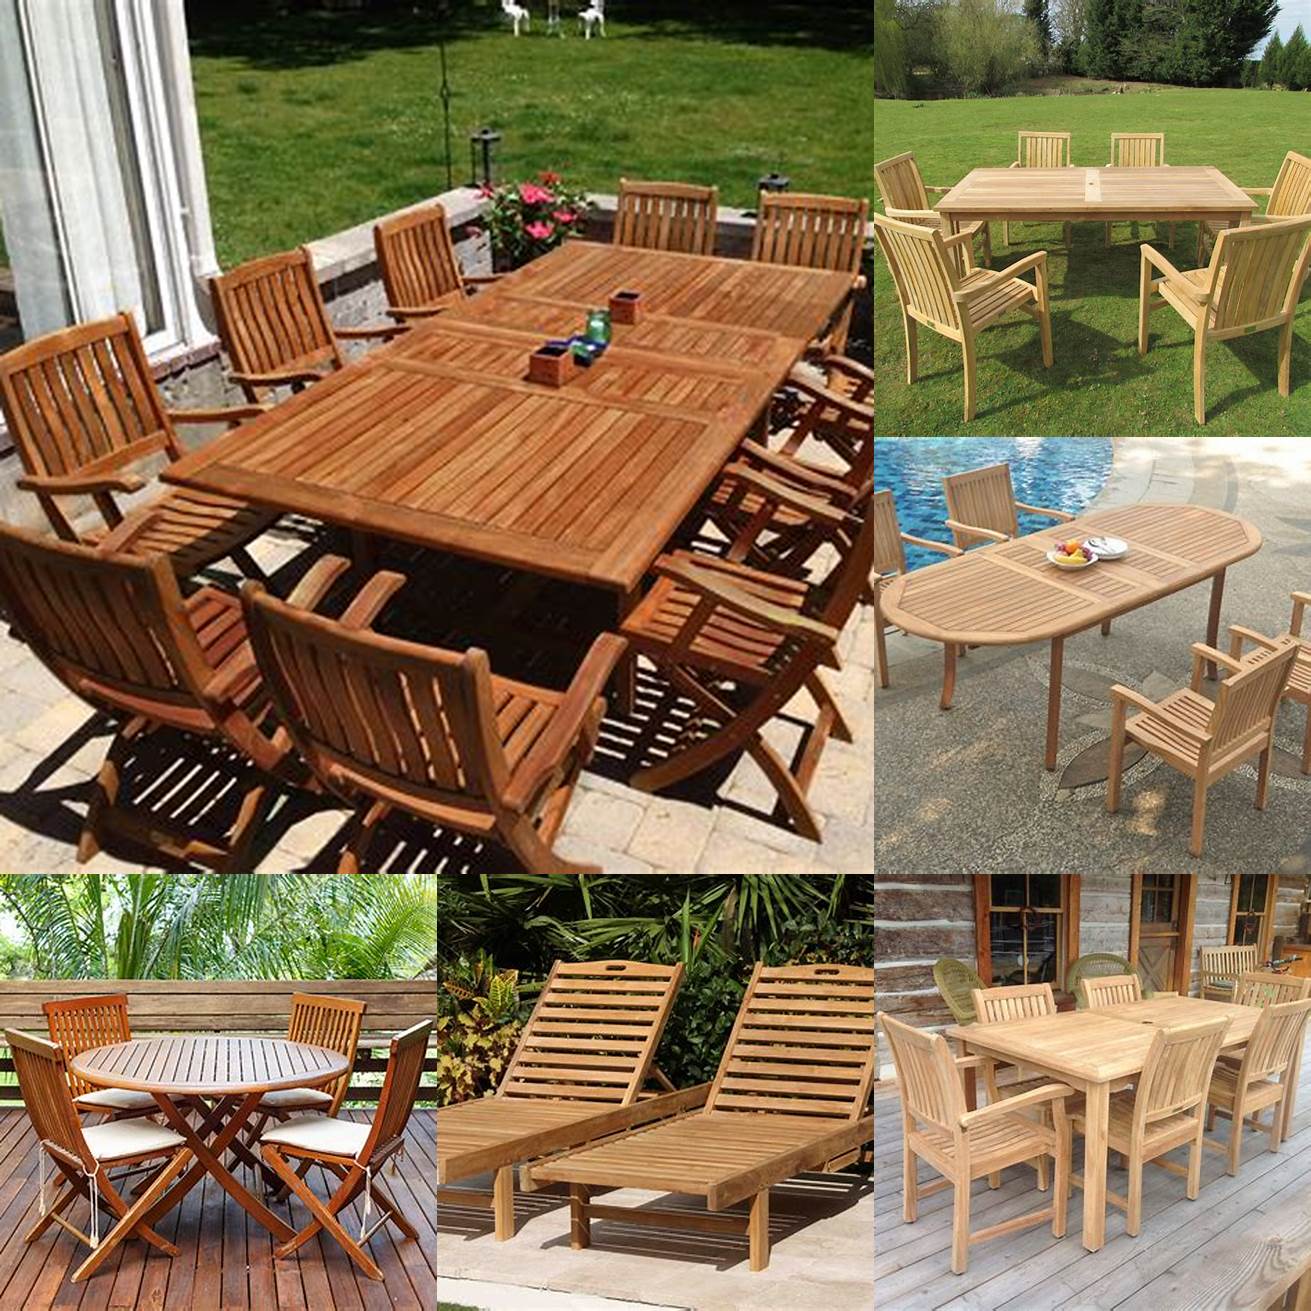 A Selection Of UEAED Teak Furniture Styles